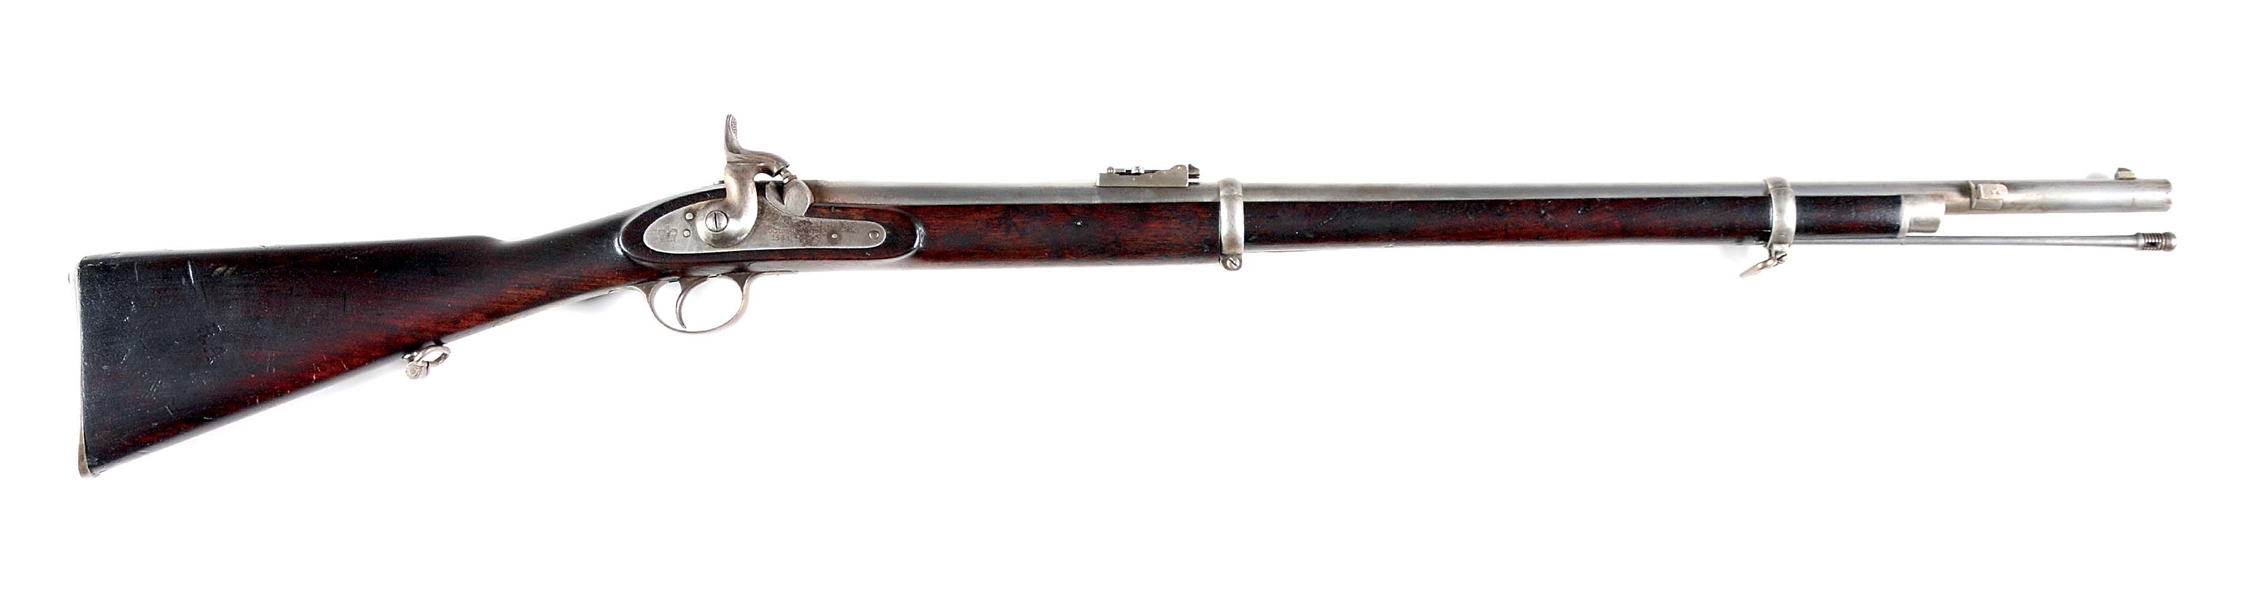 (A) ENFIELD PATTERN 61 PERCUSSION RIFLE. 